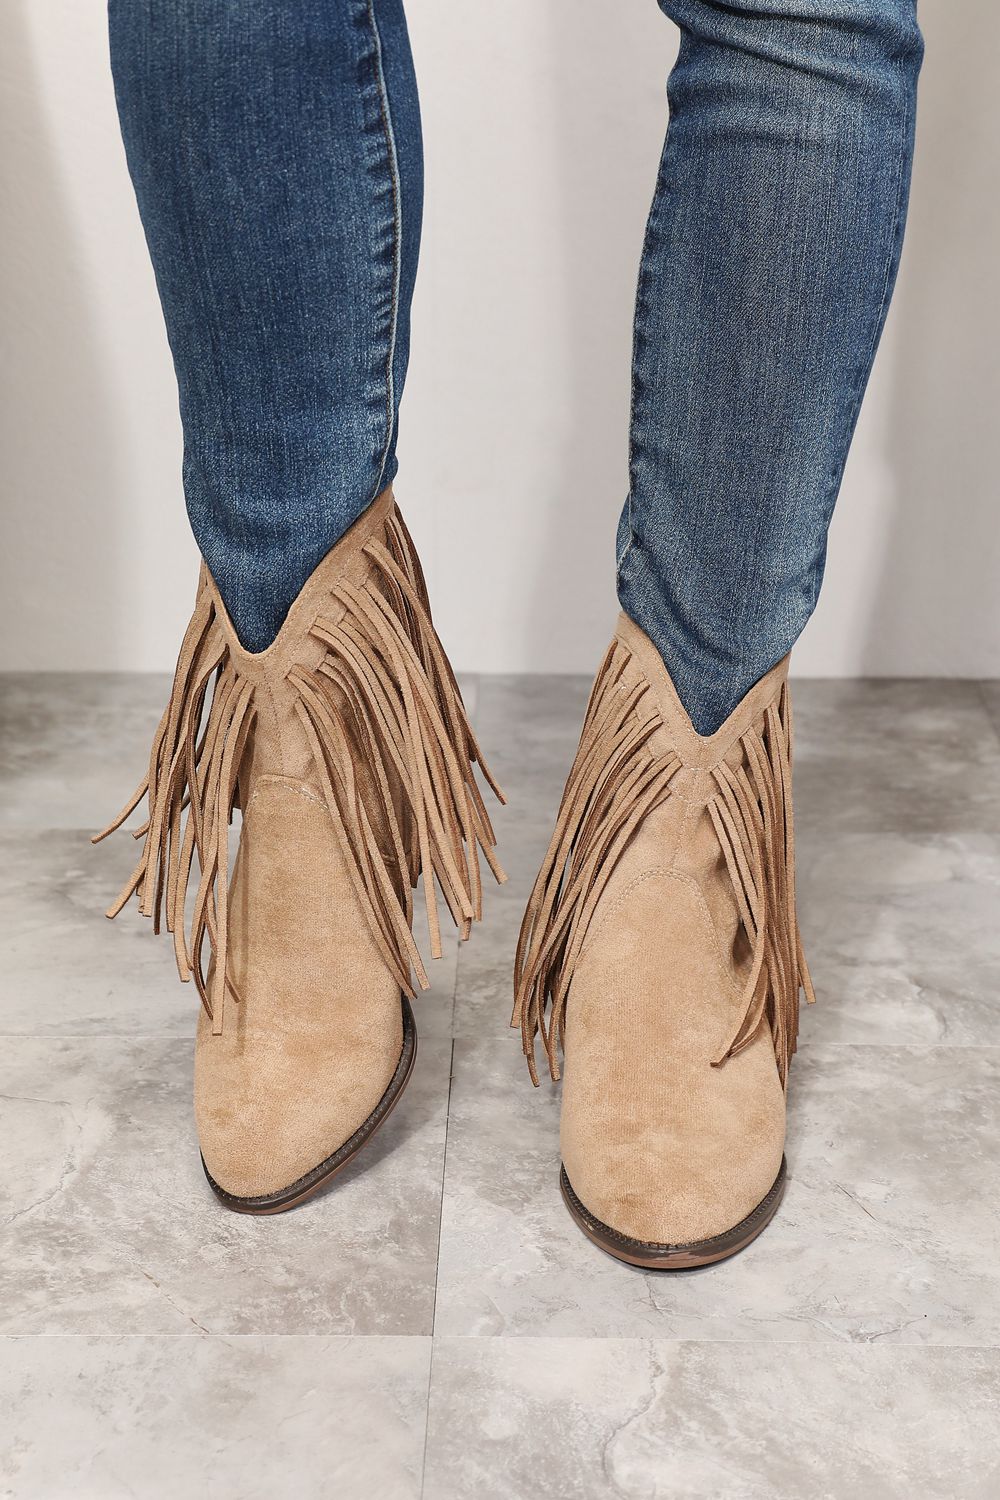 Stockyards Western Ankle Boots - Cheeky Chic Boutique